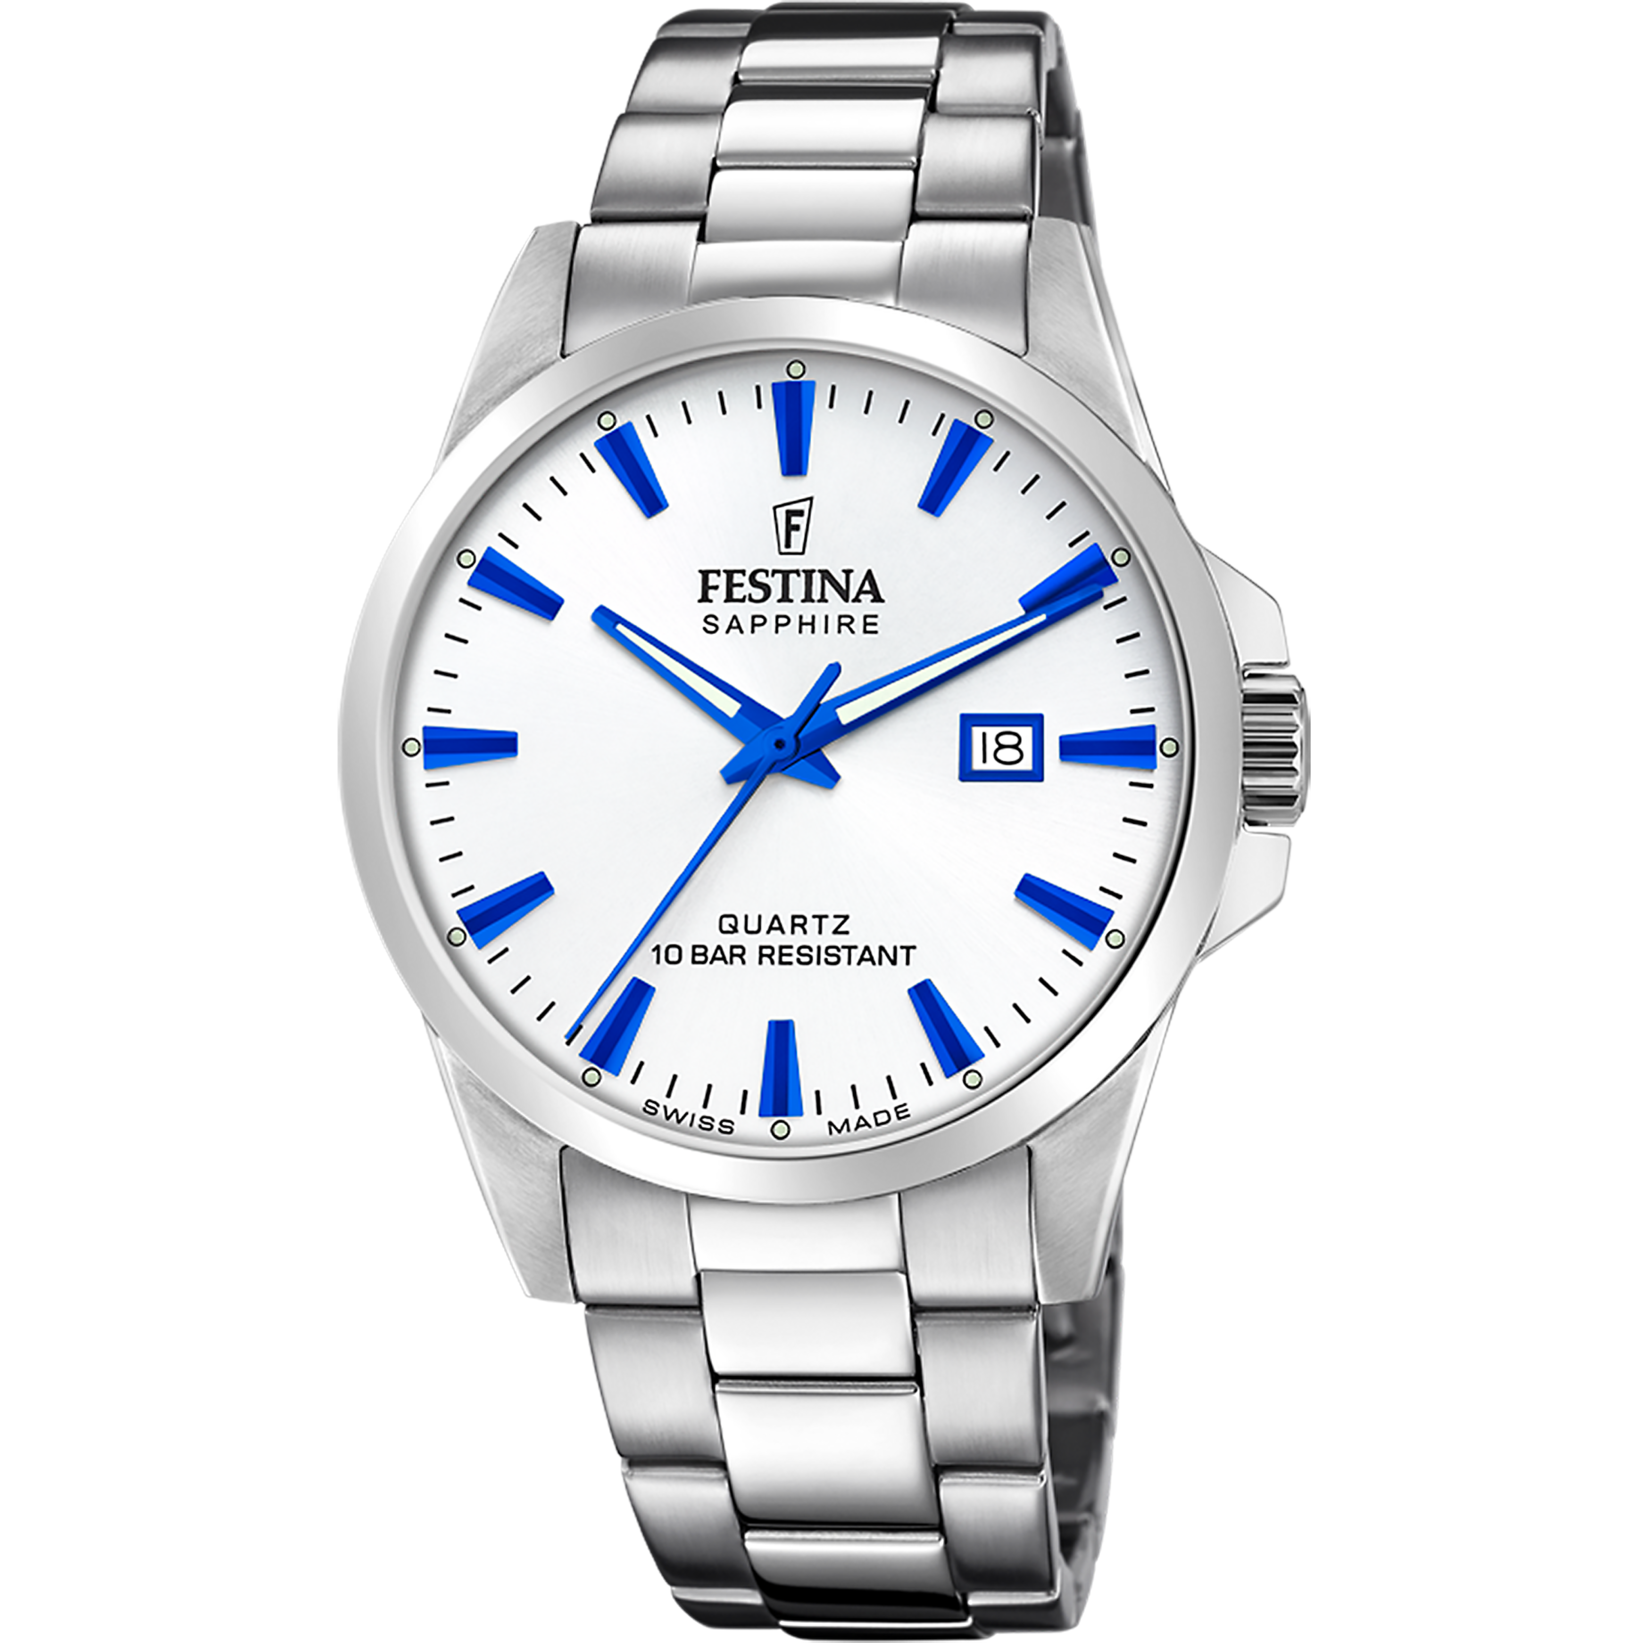 Festina Swiss Made F20024-5 - Analog - Strap Material Stainless Steel I Festina Watches USA